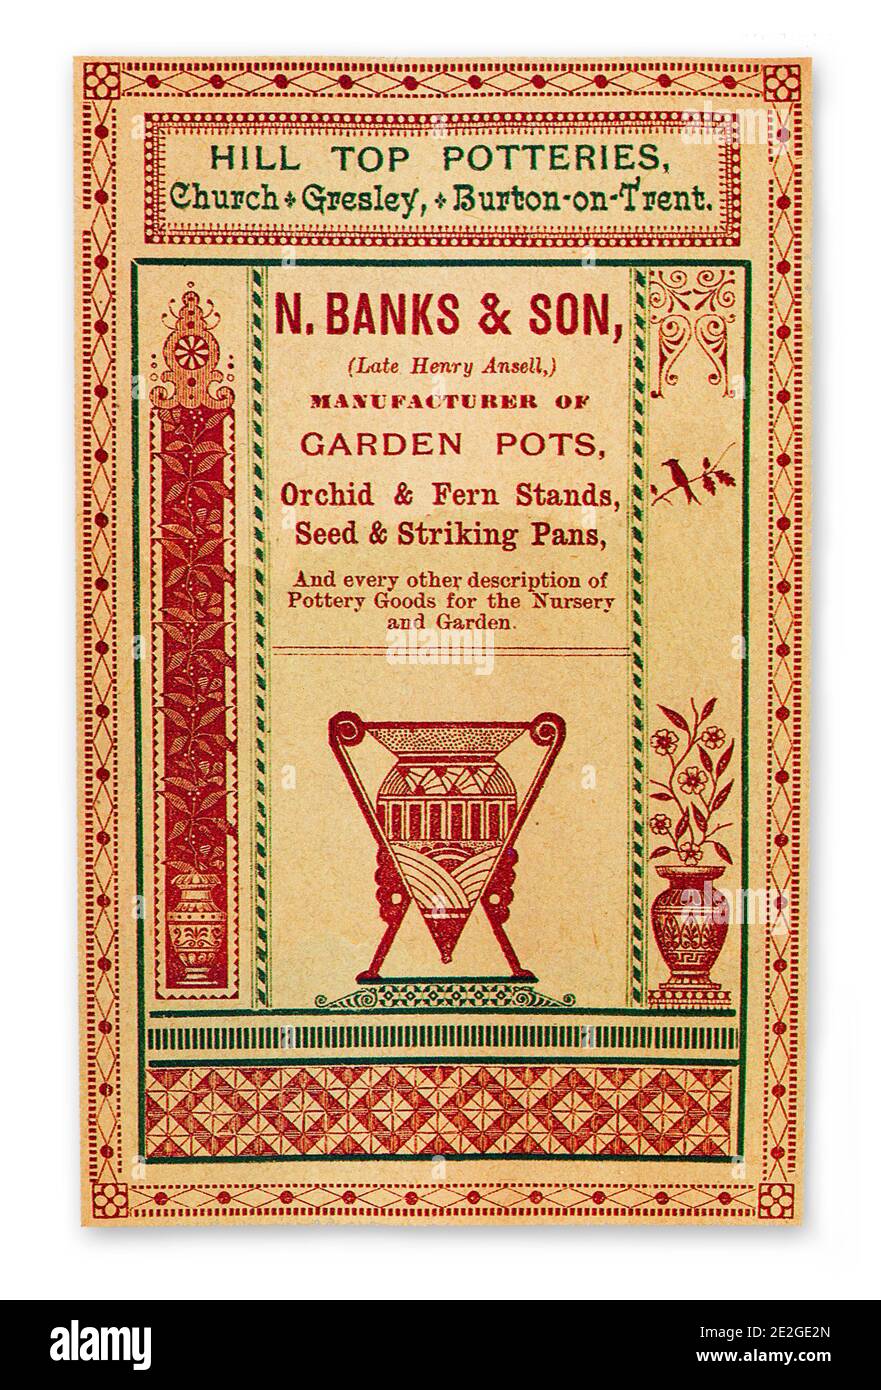 A trade advertisement for garden pots and ceramics  from Hill Top Potteries during the Victorian craze for ferns and orchids Stock Photo